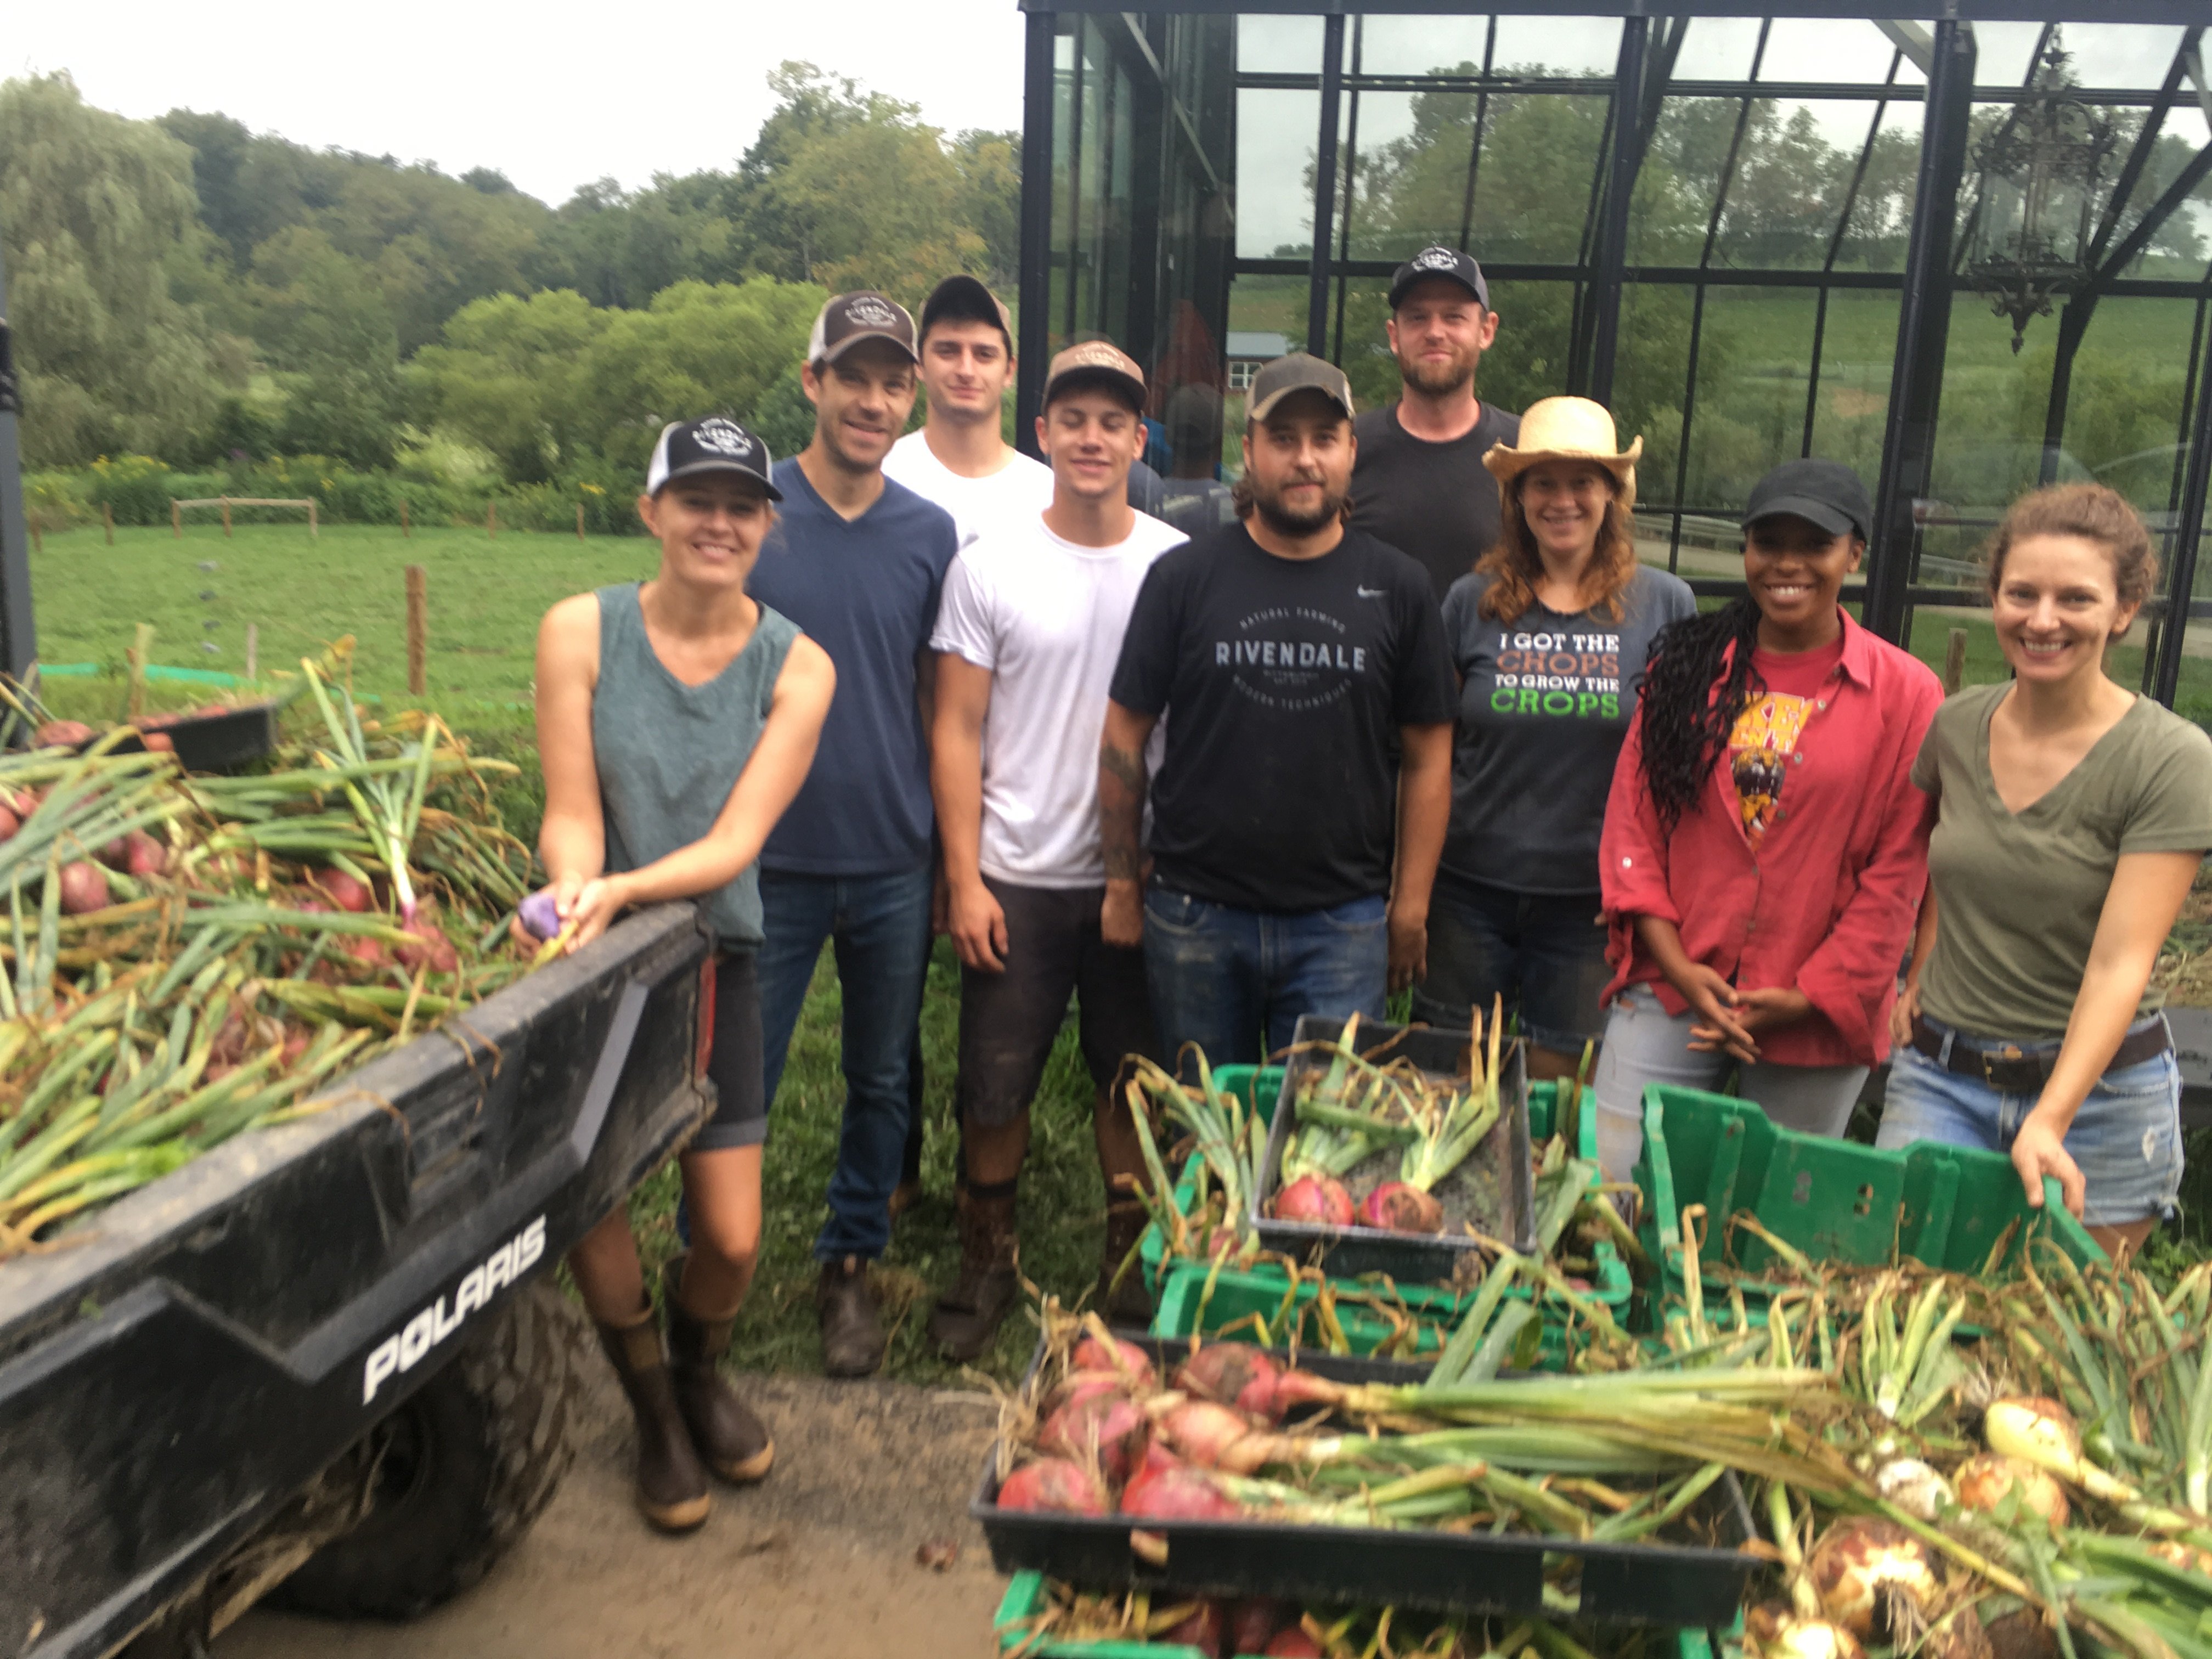 Next Happening: Rivendale Farms CSA Newsletter, Week 10 (August 14)